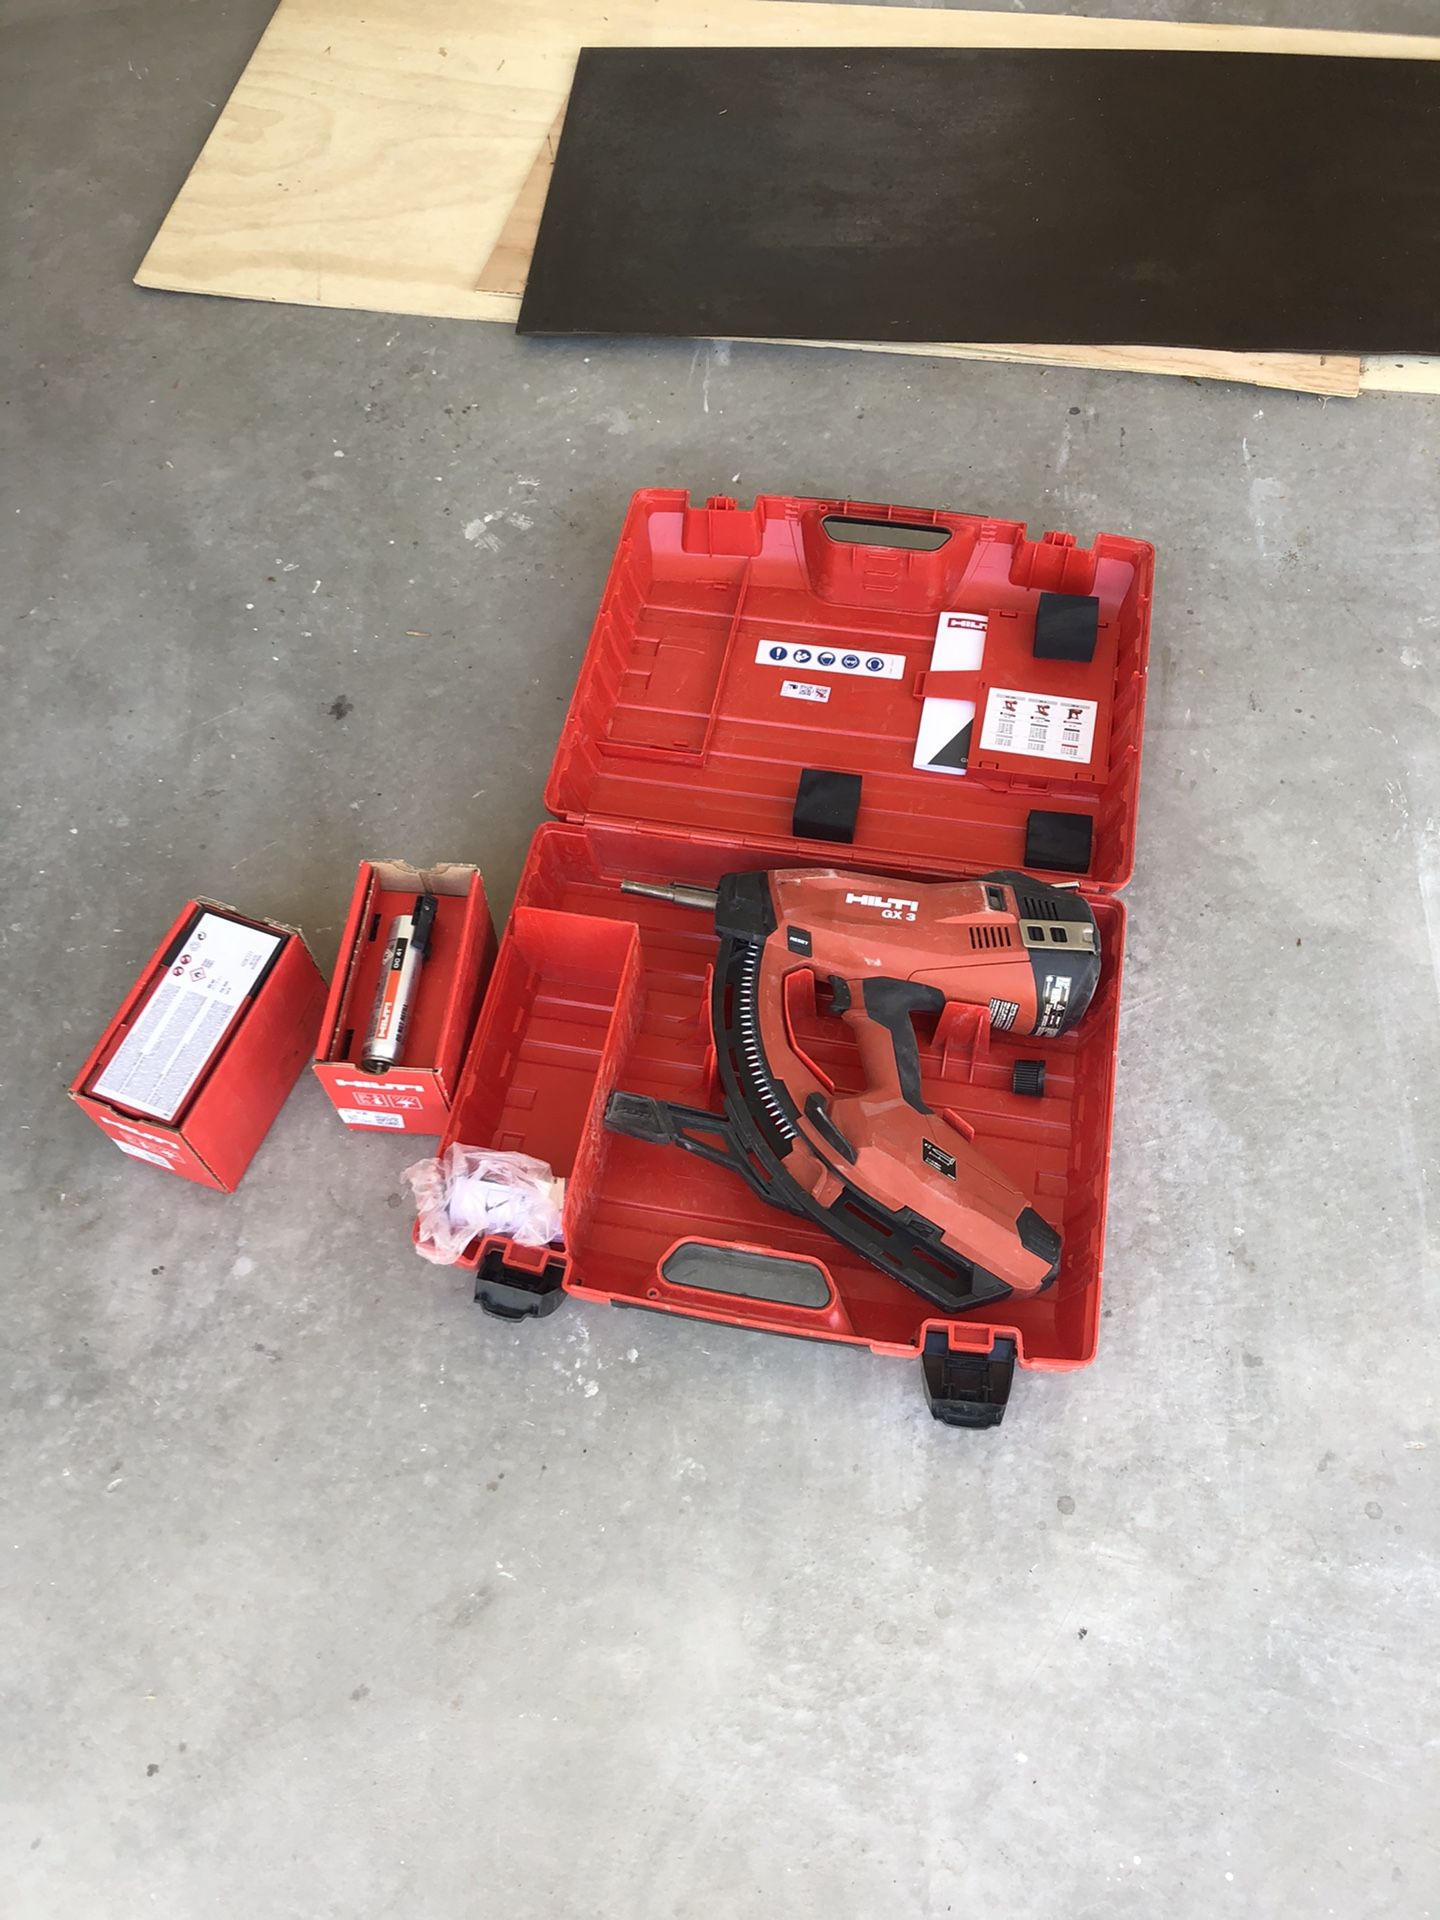 Hilti gr3 nail gun used two times good condition